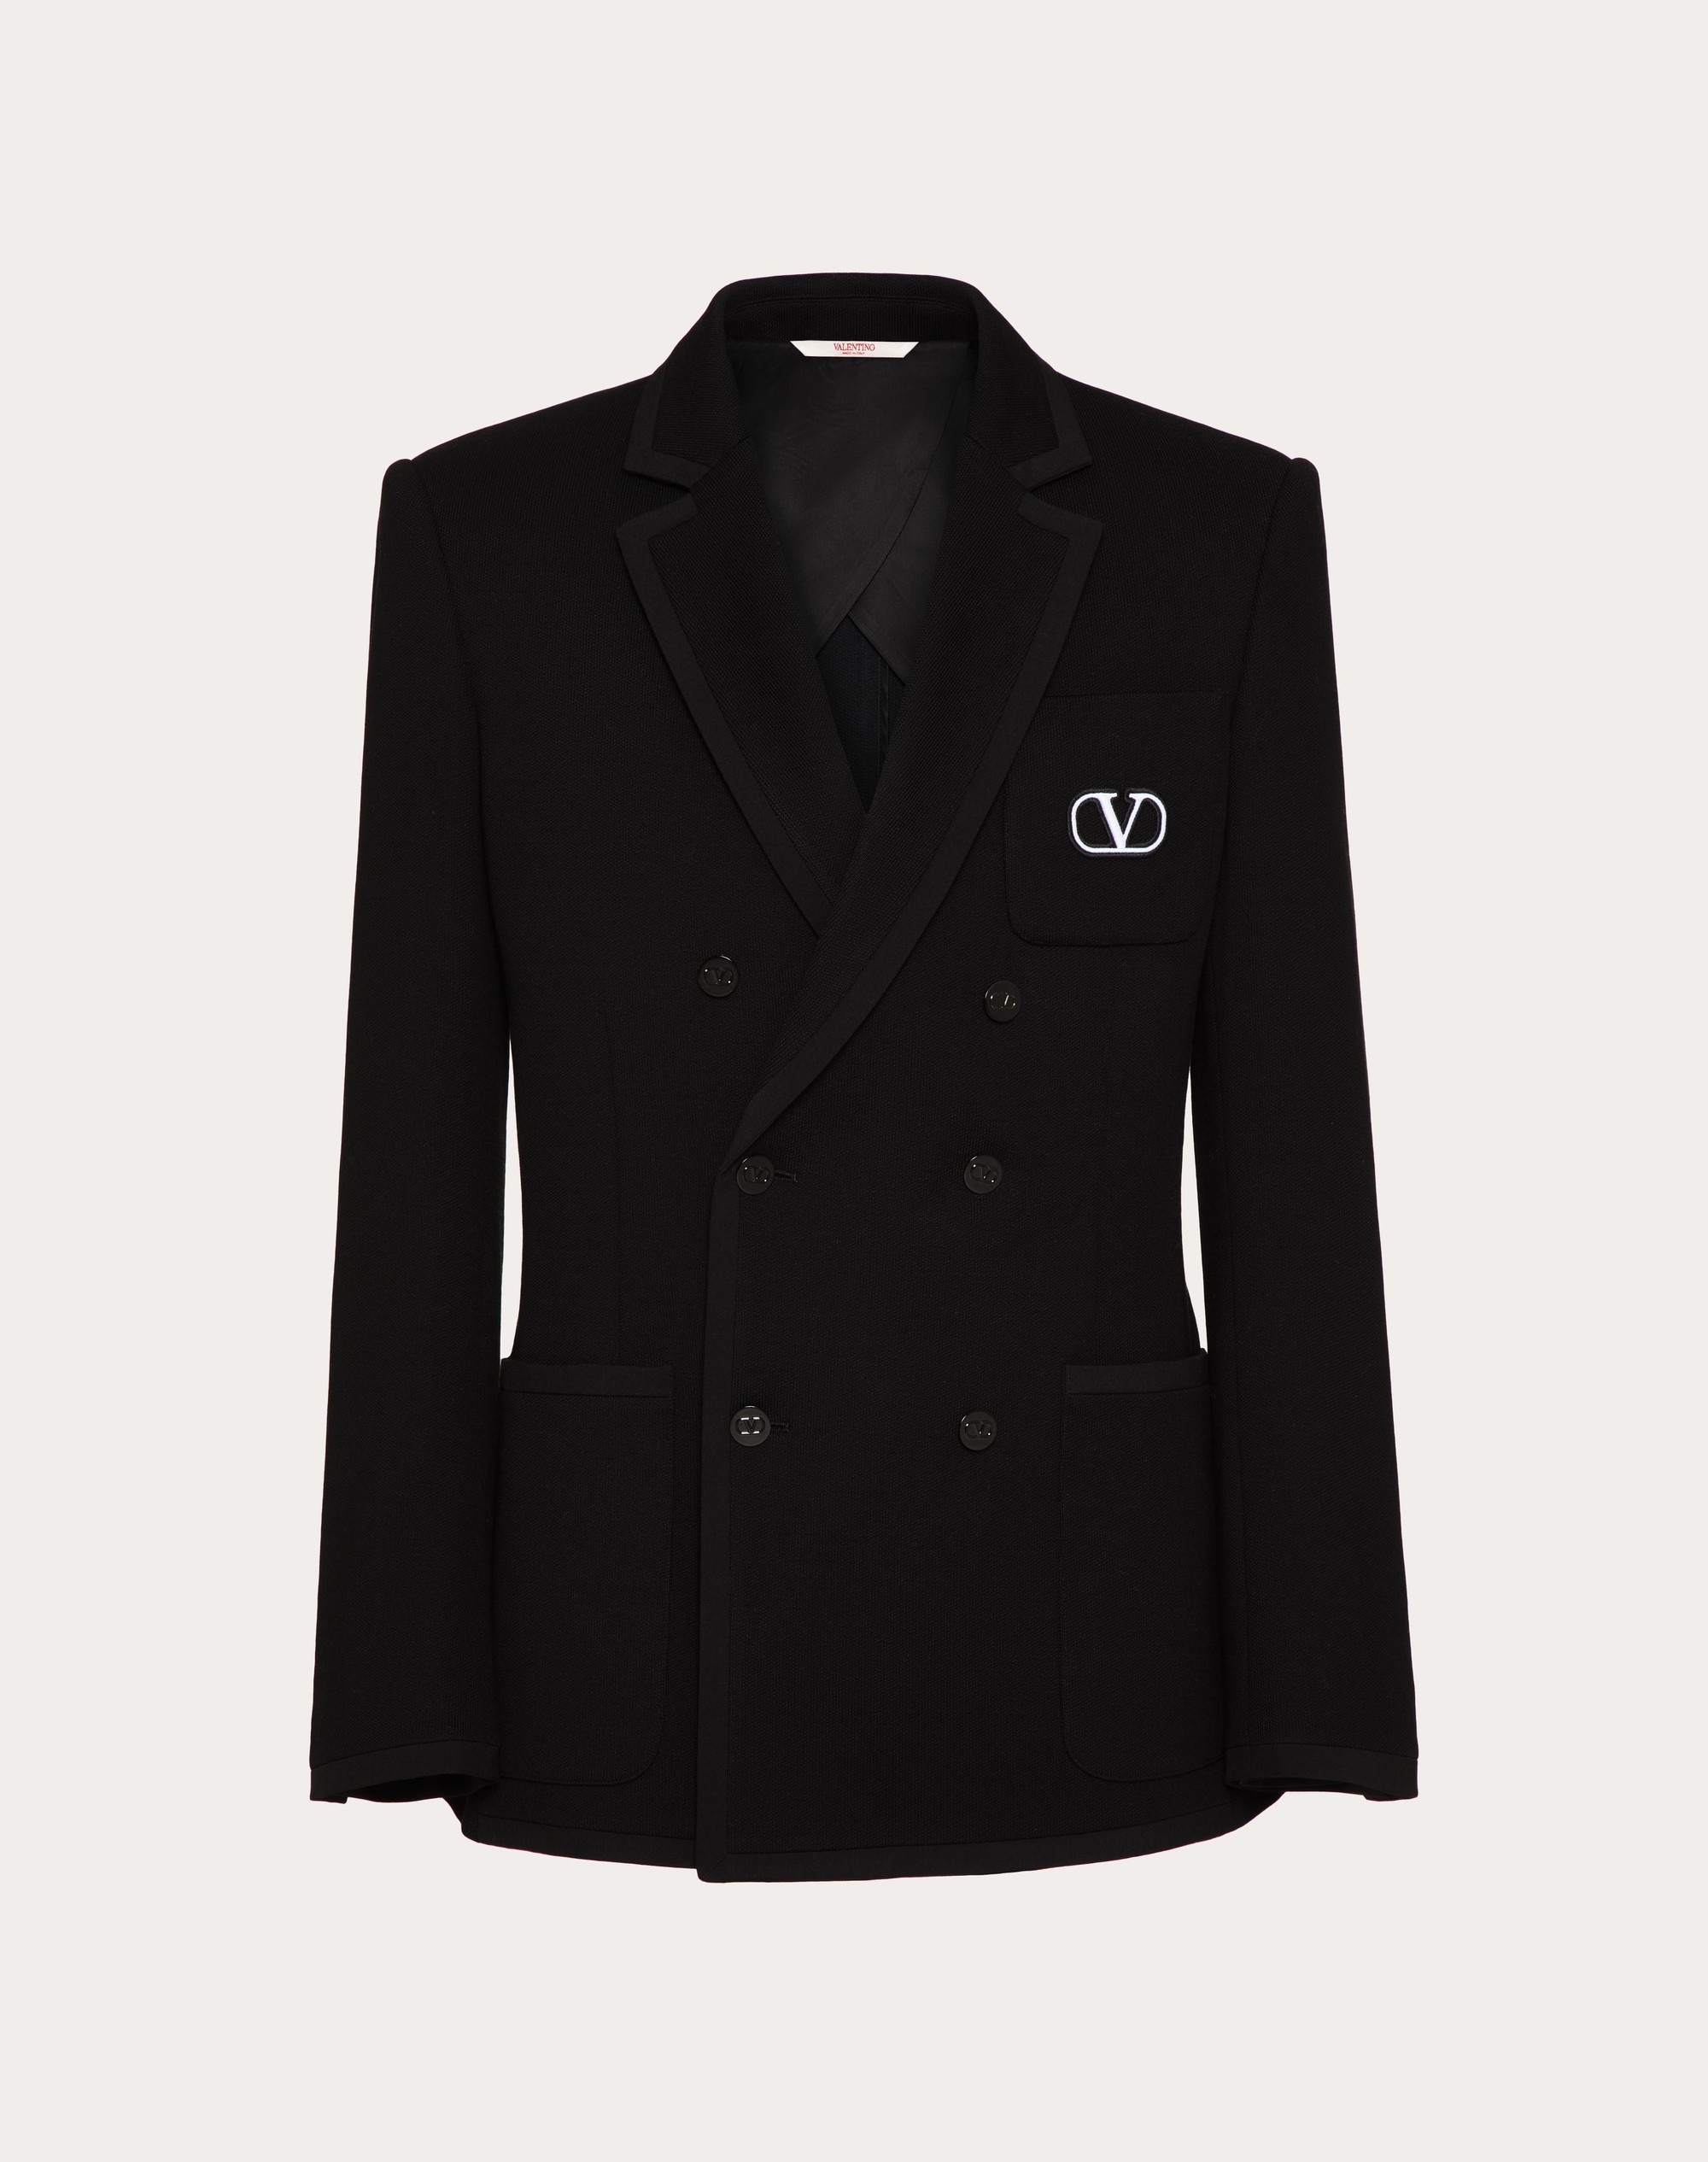 DOUBLE-BREASTED COTTON JERSEY JACKET WITH VLOGO SIGNATURE PATCH - 1